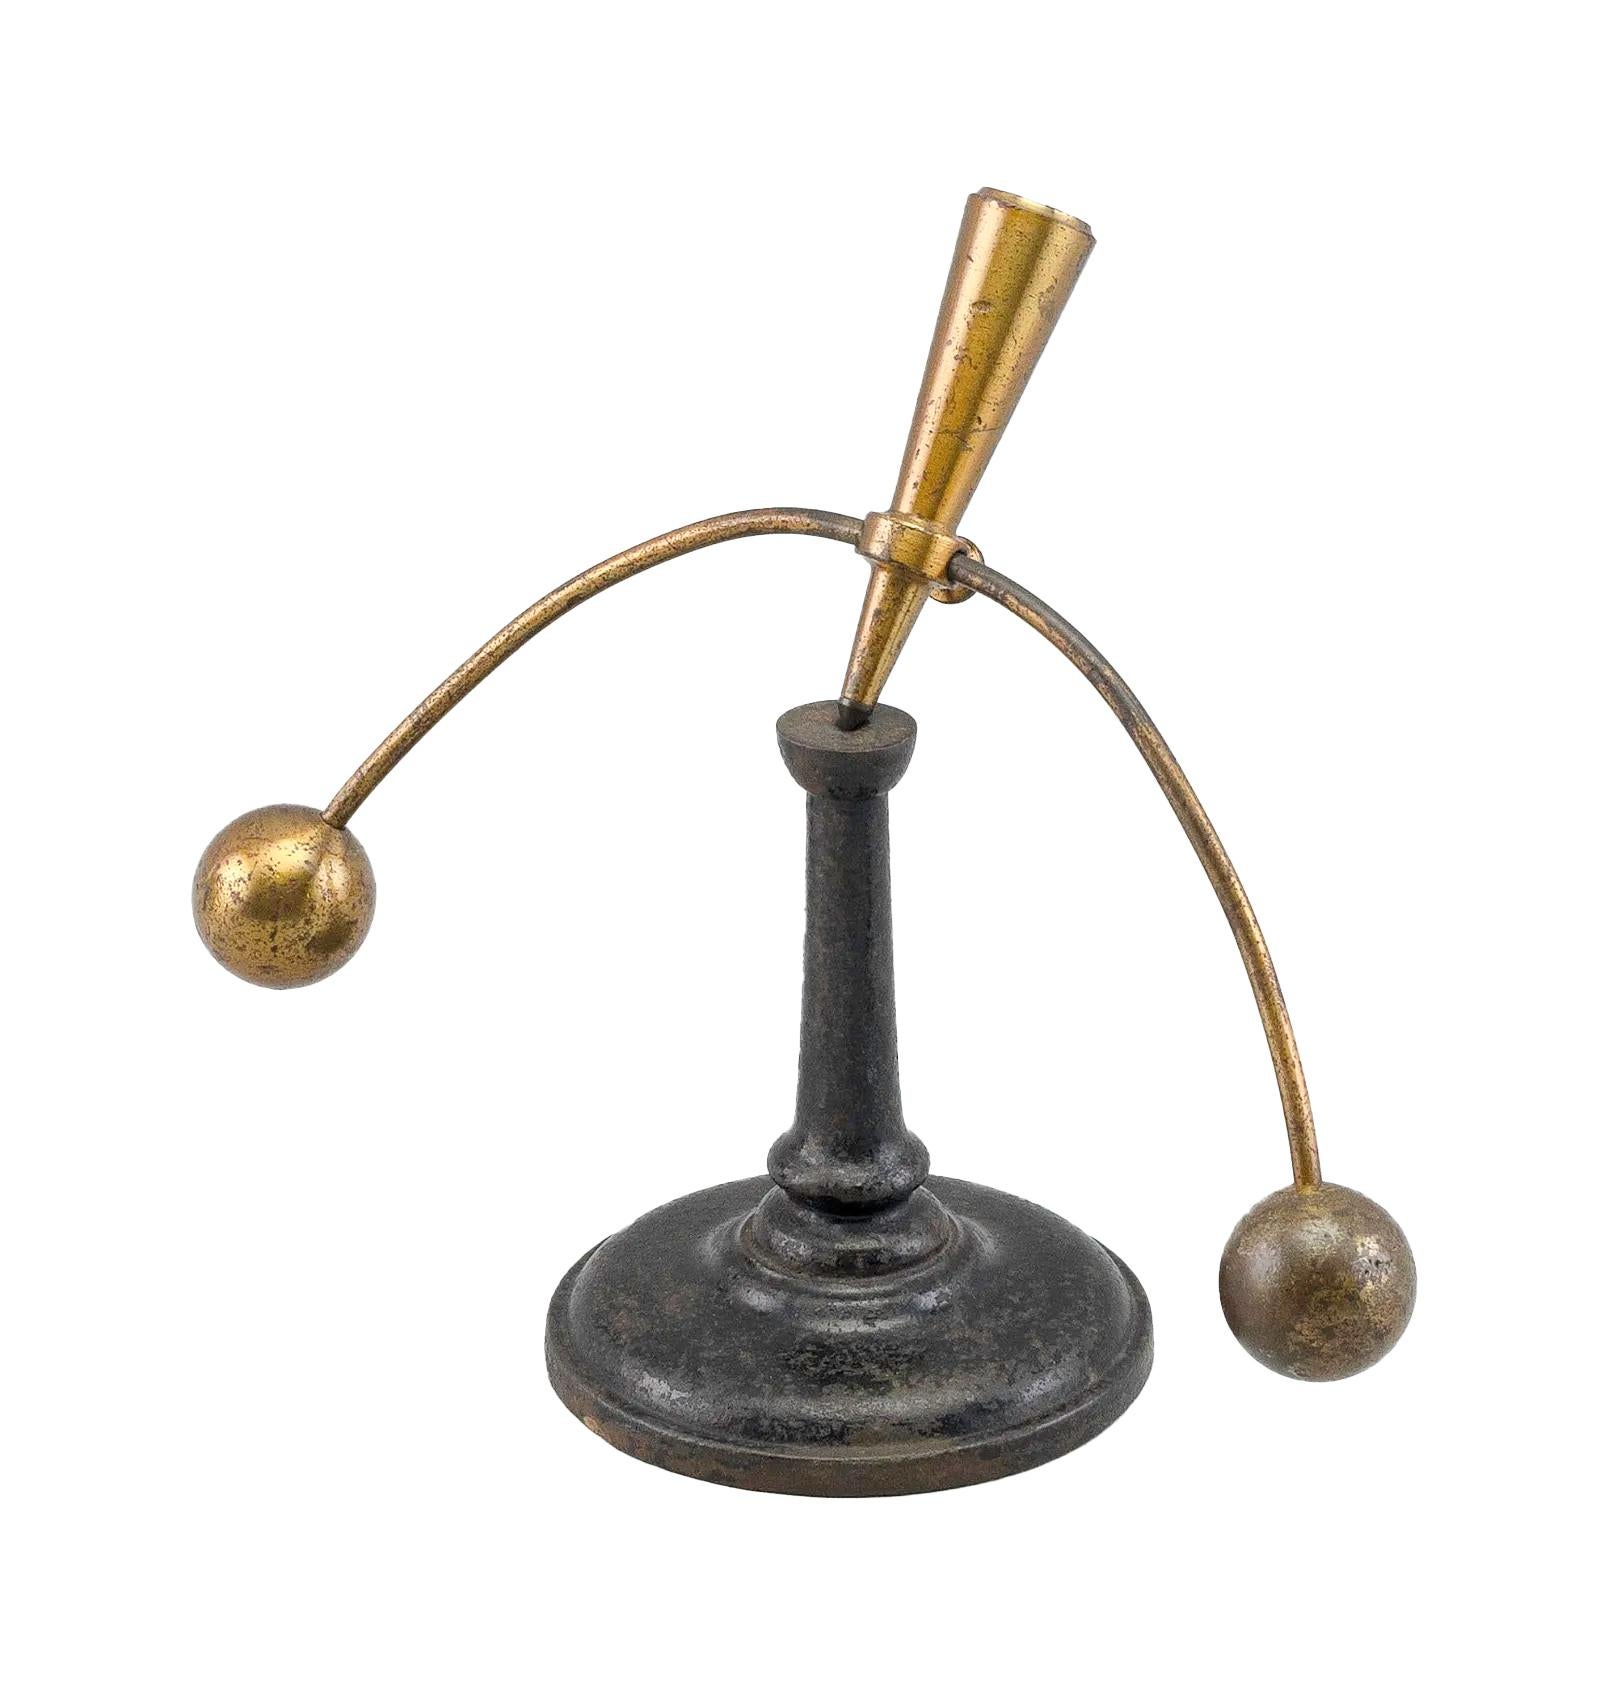 19th / 20th century didactic balance device, probably made for use in a physics laboratory or classroom. In the Style of Max Kohl (1853-1908), all in lacquered brass, a semi-circular rod passes through an inverted cone with a set-screw and has a